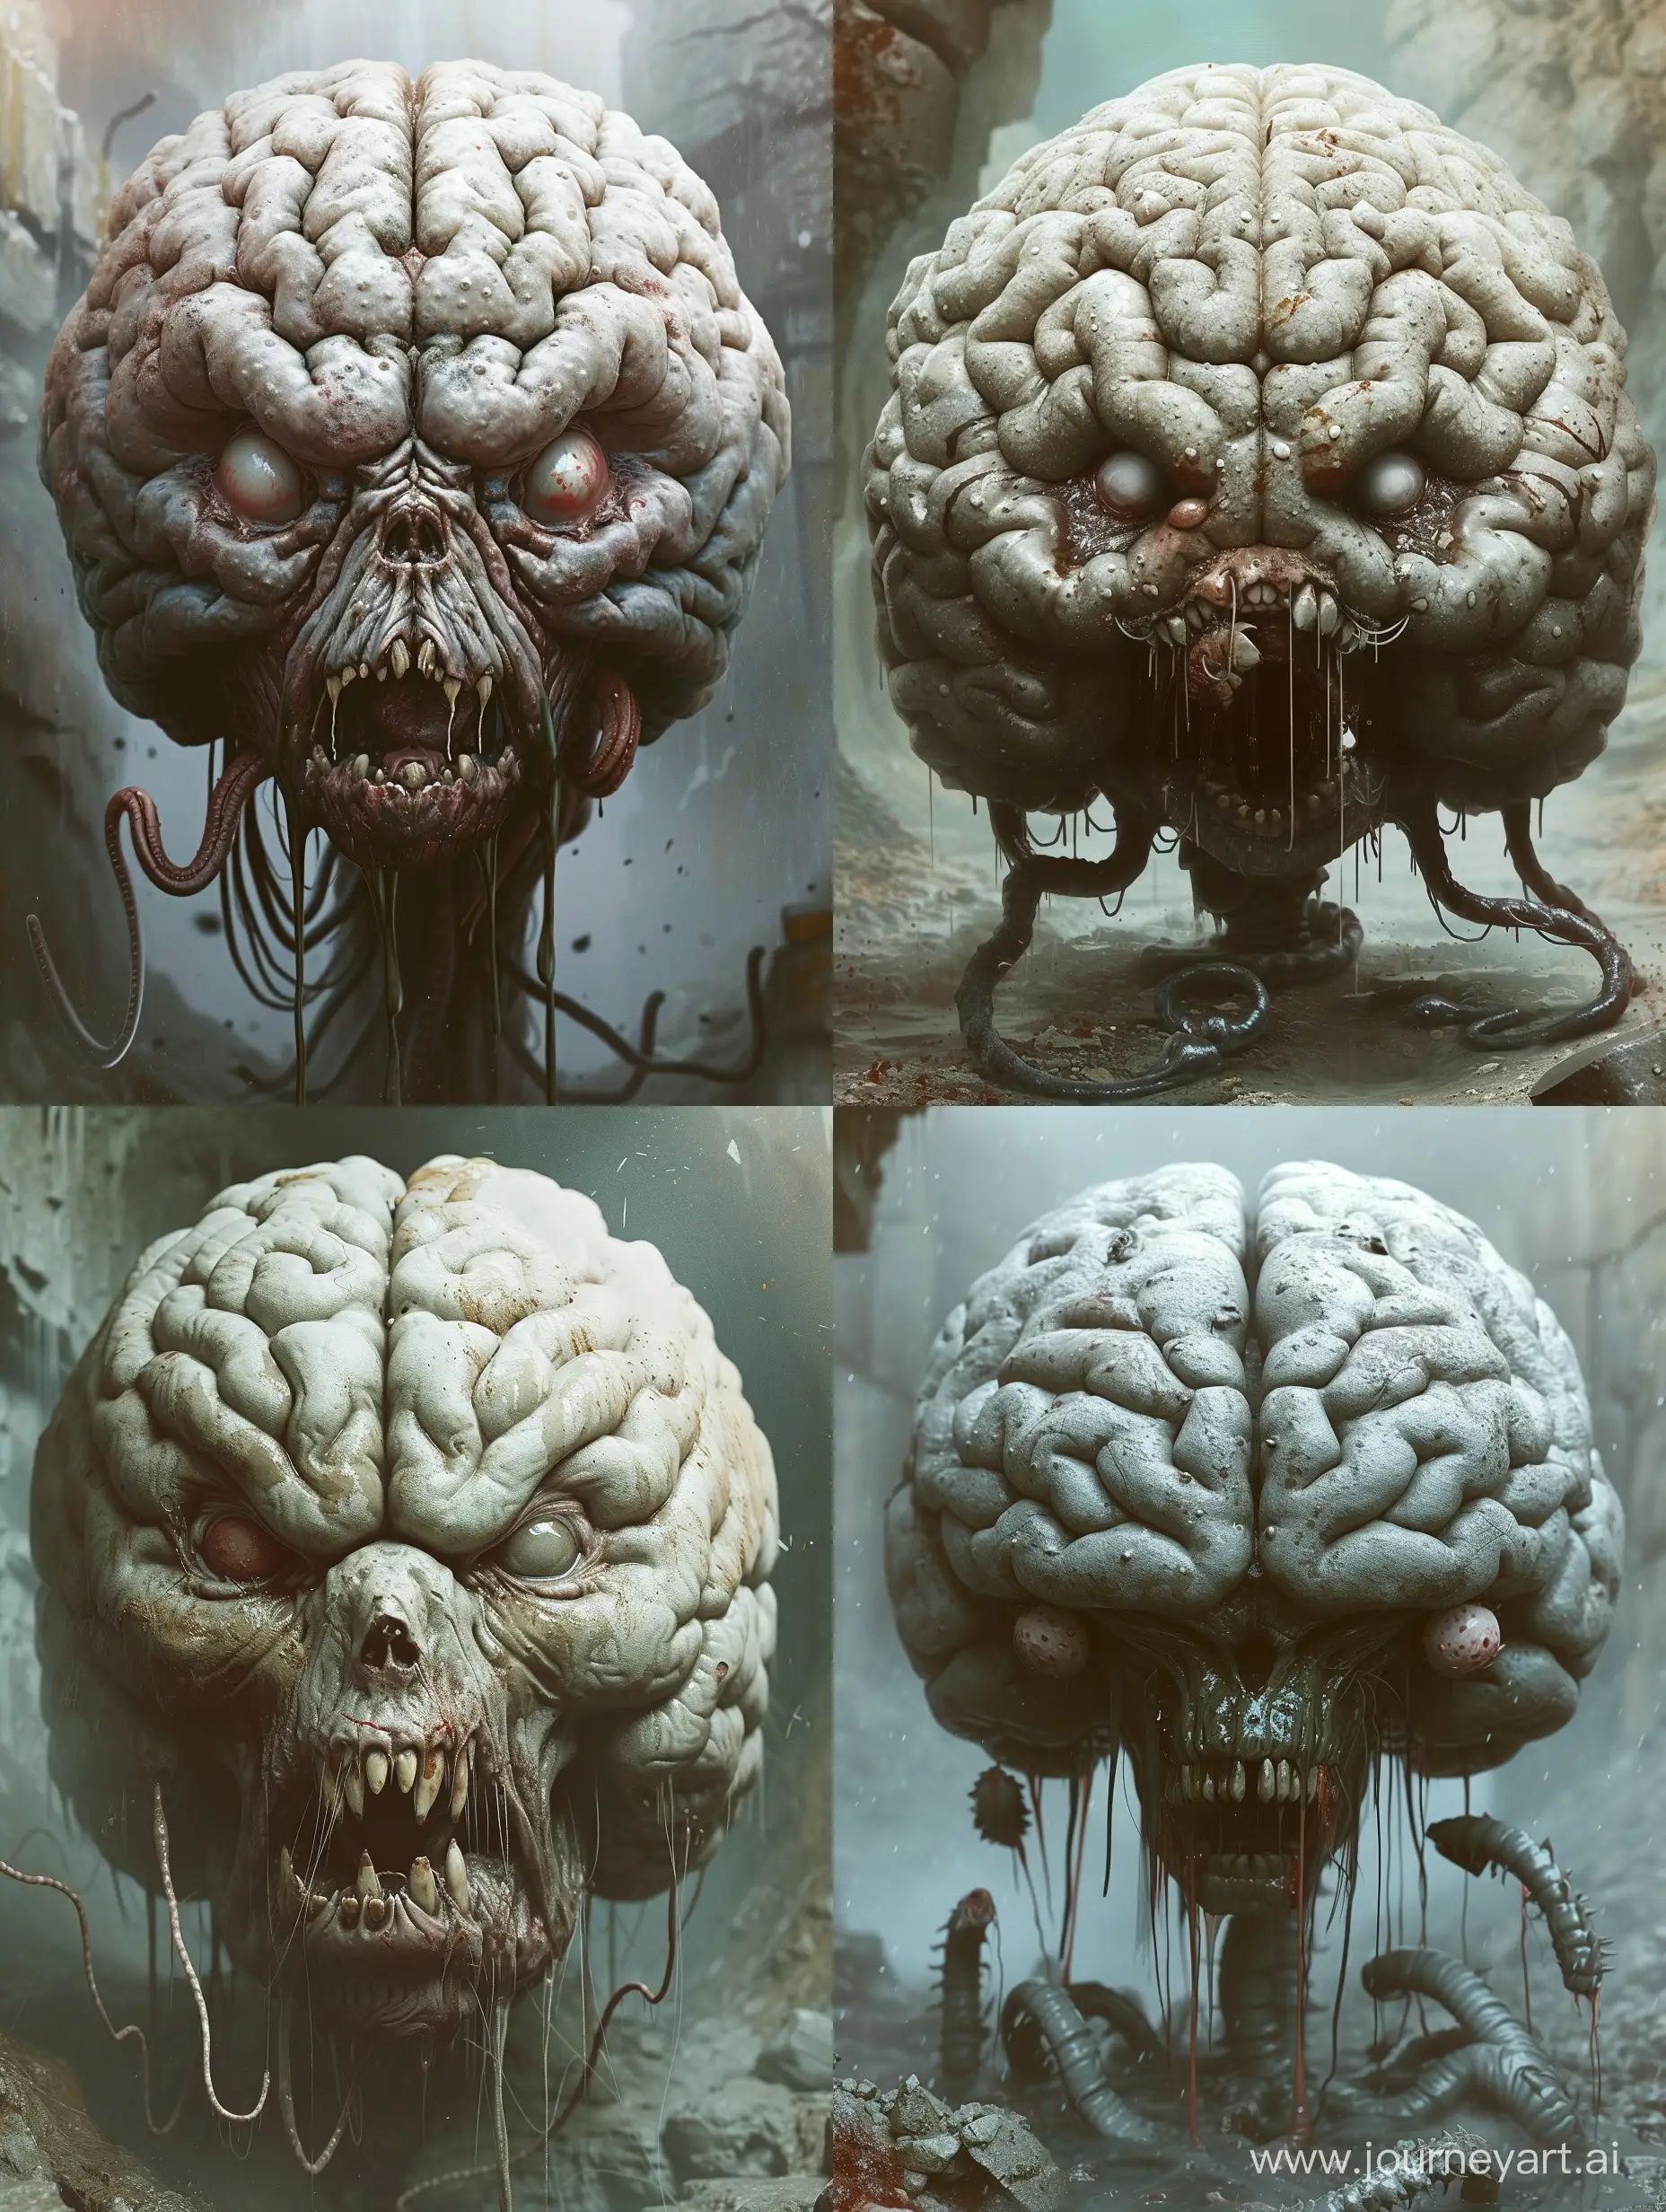 a grotesque and highly detailed fantasy or horror creature. It appears to be a monstrous version of a brain-like entity with several anatomical and otherworldly characteristics:

The creature's head is oversized and reminiscent of a human brain, with many folds and textures that suggest grey matter.
The surface of the "brain" also has numerous pustule-like structures, which give it an unsettling, diseased appearance.
The entity has two eyes that are glaring forward. These eyes have humanoid features but look bloodshot and ferocious.
Below the eyes, there's a wide, gaping mouth, lined with sharp, irregular teeth. The mouth is open as if the creature is growling or screaming.
Stringy, saliva-like strands are visible dripping from the mouth, adding to the visceral and disturbing character of the image.
Several tentacle-like appendages, resembling oversized brain convolutions or worms, extend from the base of the head, suggesting that the creature may move or manipulate objects with these.
The background is blurry, but it seems to be an environment with a cold and damp atmosphere, possibly a dungeon or cave, which complements the horror aesthetic of the creature.
Overall, the image is likely designed to create a visceral and unsettling effect, and could be concept art from a horror game, movie, or another piece of speculative fiction. The image is rich in texture and detail, emphasizing the grotesque and surreal nature of the creature it depicts.